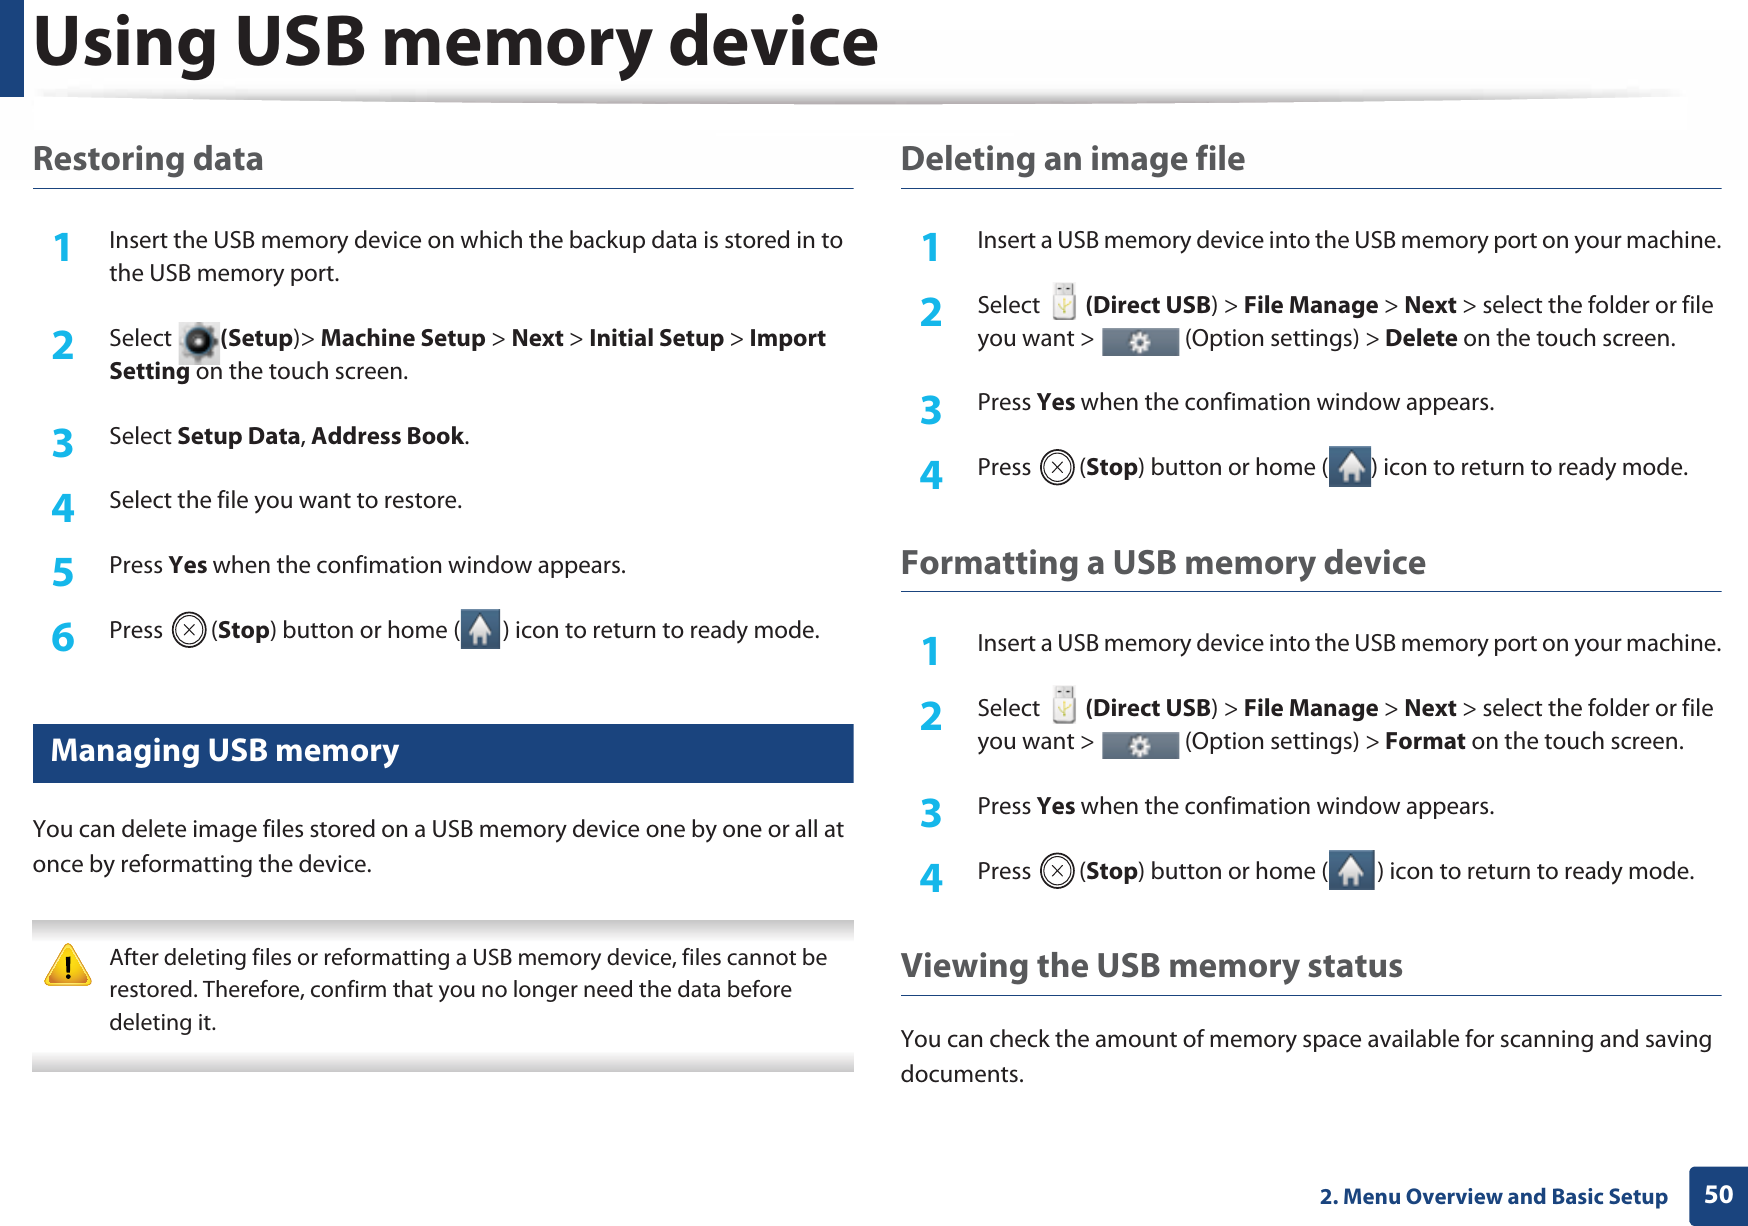 Using USB memory device502. Menu Overview and Basic SetupRestoring data1Insert the USB memory device on which the backup data is stored in to the USB memory port.2  Select (Setup)&gt; Machine Setup &gt; Next &gt; Initial Setup &gt; Import Setting on the touch screen.3  Select Setup Data, Address Book. 4  Select the file you want to restore.5  Press Yes when the confimation window appears.6  Press (Stop) button or home ( ) icon to return to ready mode.16 Managing USB memoryYou can delete image files stored on a USB memory device one by one or all at once by reformatting the device. After deleting files or reformatting a USB memory device, files cannot be restored. Therefore, confirm that you no longer need the data before deleting it. Deleting an image file1Insert a USB memory device into the USB memory port on your machine.2  Select   (Direct USB) &gt; File Manage &gt; Next &gt; select the folder or file you want &gt;   (Option settings) &gt; Delete on the touch screen.3  Press Yes when the confimation window appears.4  Press (Stop) button or home ( ) icon to return to ready mode.Formatting a USB memory device1Insert a USB memory device into the USB memory port on your machine.2  Select   (Direct USB) &gt; File Manage &gt; Next &gt; select the folder or file you want &gt;   (Option settings) &gt; Format on the touch screen.3  Press Yes when the confimation window appears.4  Press (Stop) button or home ( ) icon to return to ready mode.Viewing the USB memory statusYou can check the amount of memory space available for scanning and saving documents.